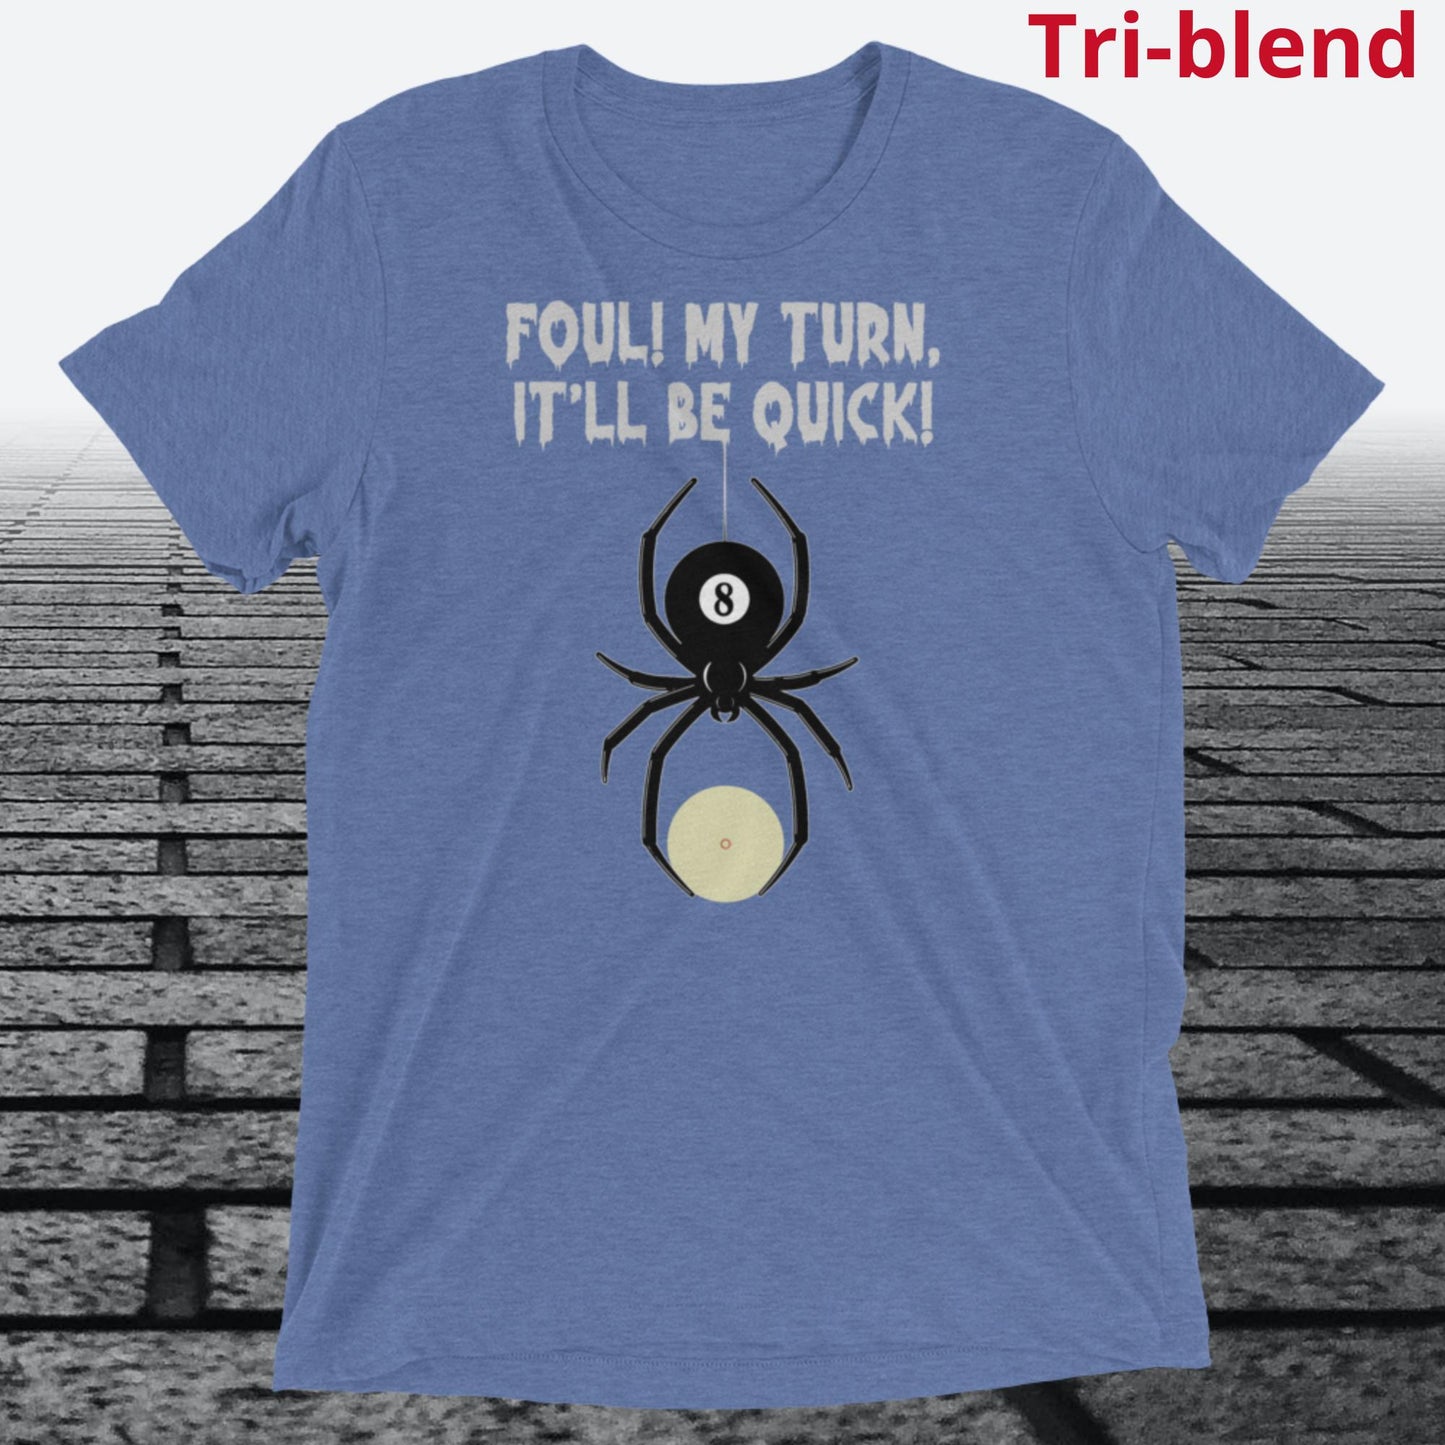 Foul, my Turn, It'll be Quick, on front of shirt, Tri-blend T-shirt